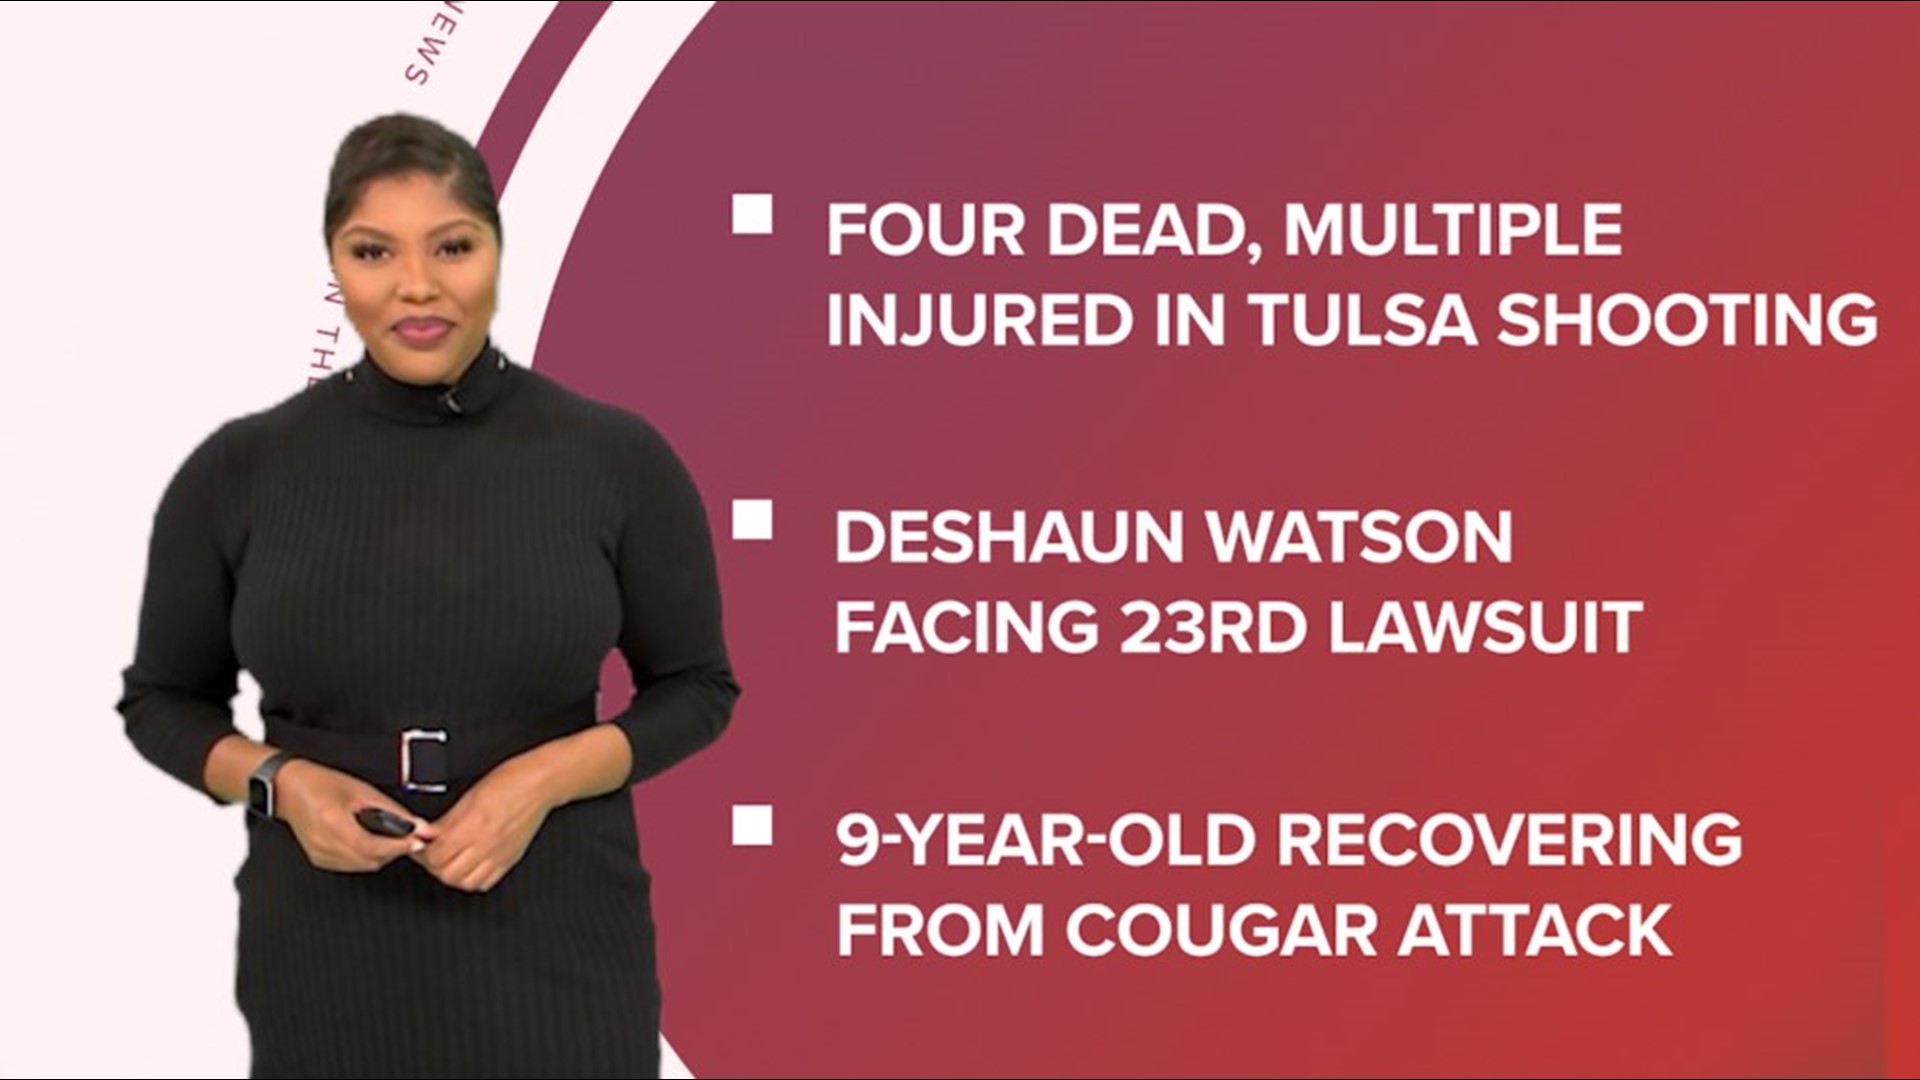 Some of the day's top stories from a shooting at a Tulsa medical center, another suit filed against Deshaun Watson, and a 9-year-old recovers from a cougar attack